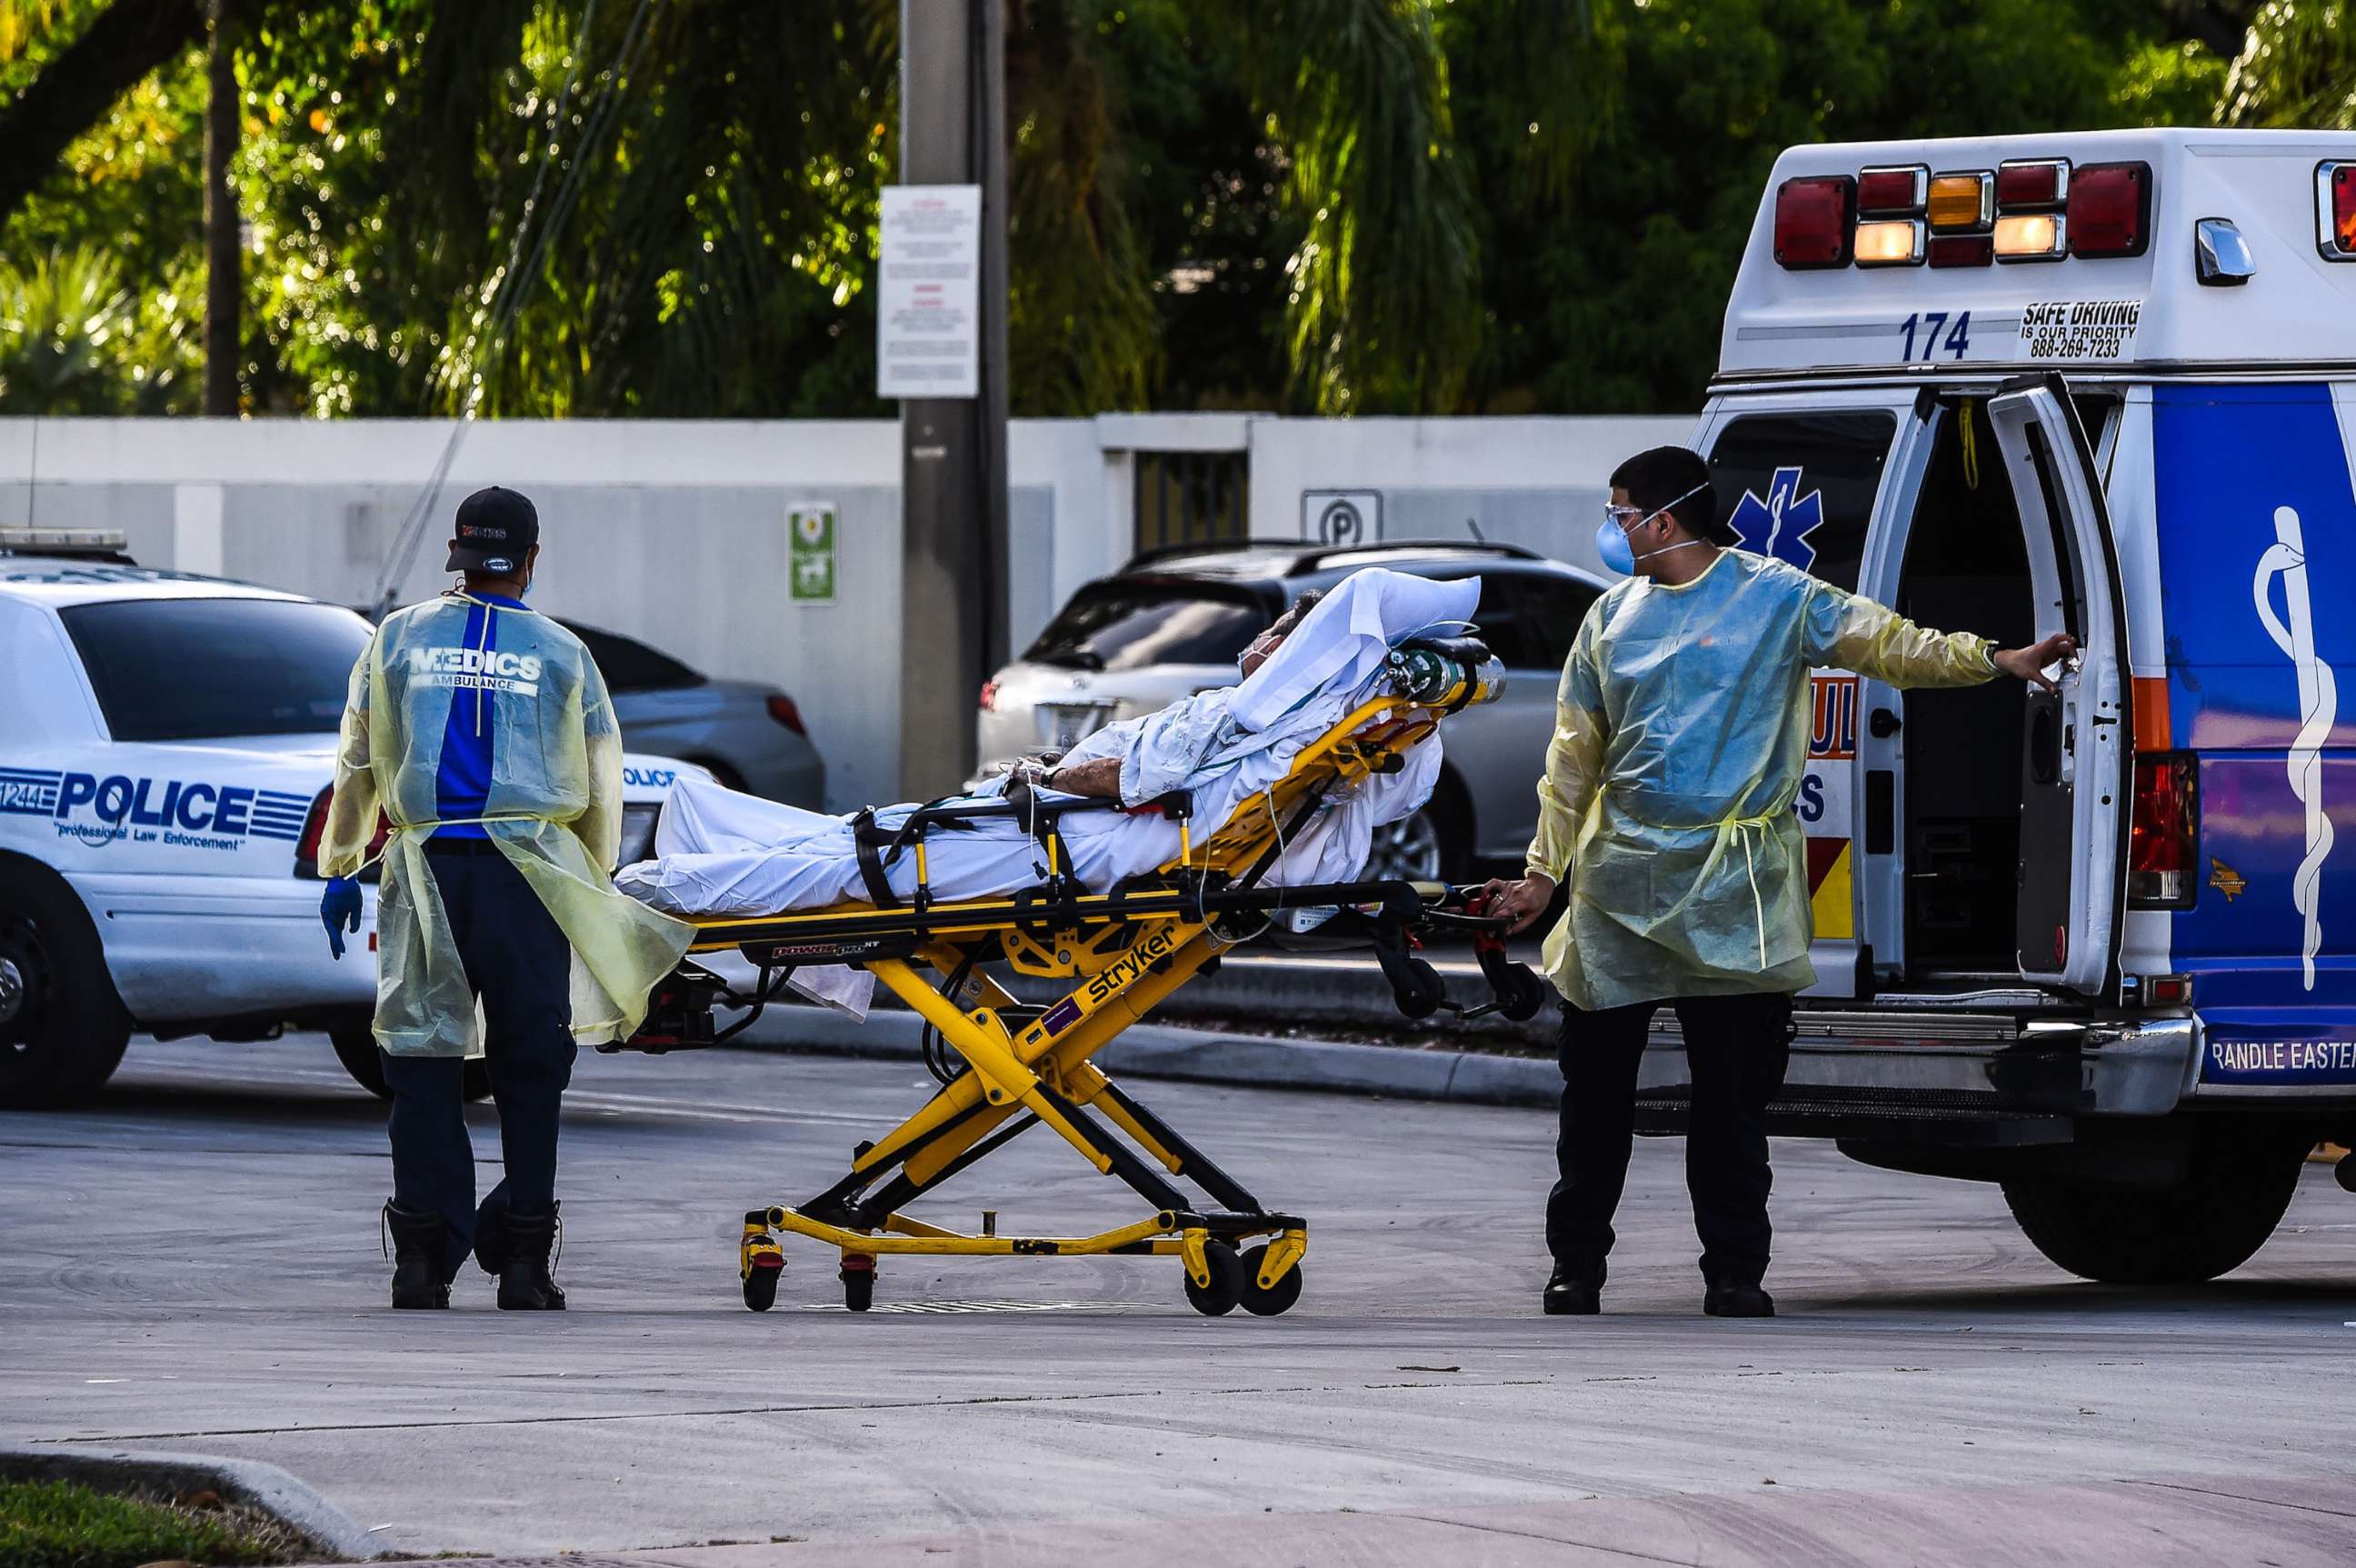 PHOTO: Medics transfer a patient on a stretcher from an ambulance outside of Emergency at Coral Gables Hospital where Coronavirus patients are treated in Coral Gables, Fla., near Miami, on July 30, 2020.